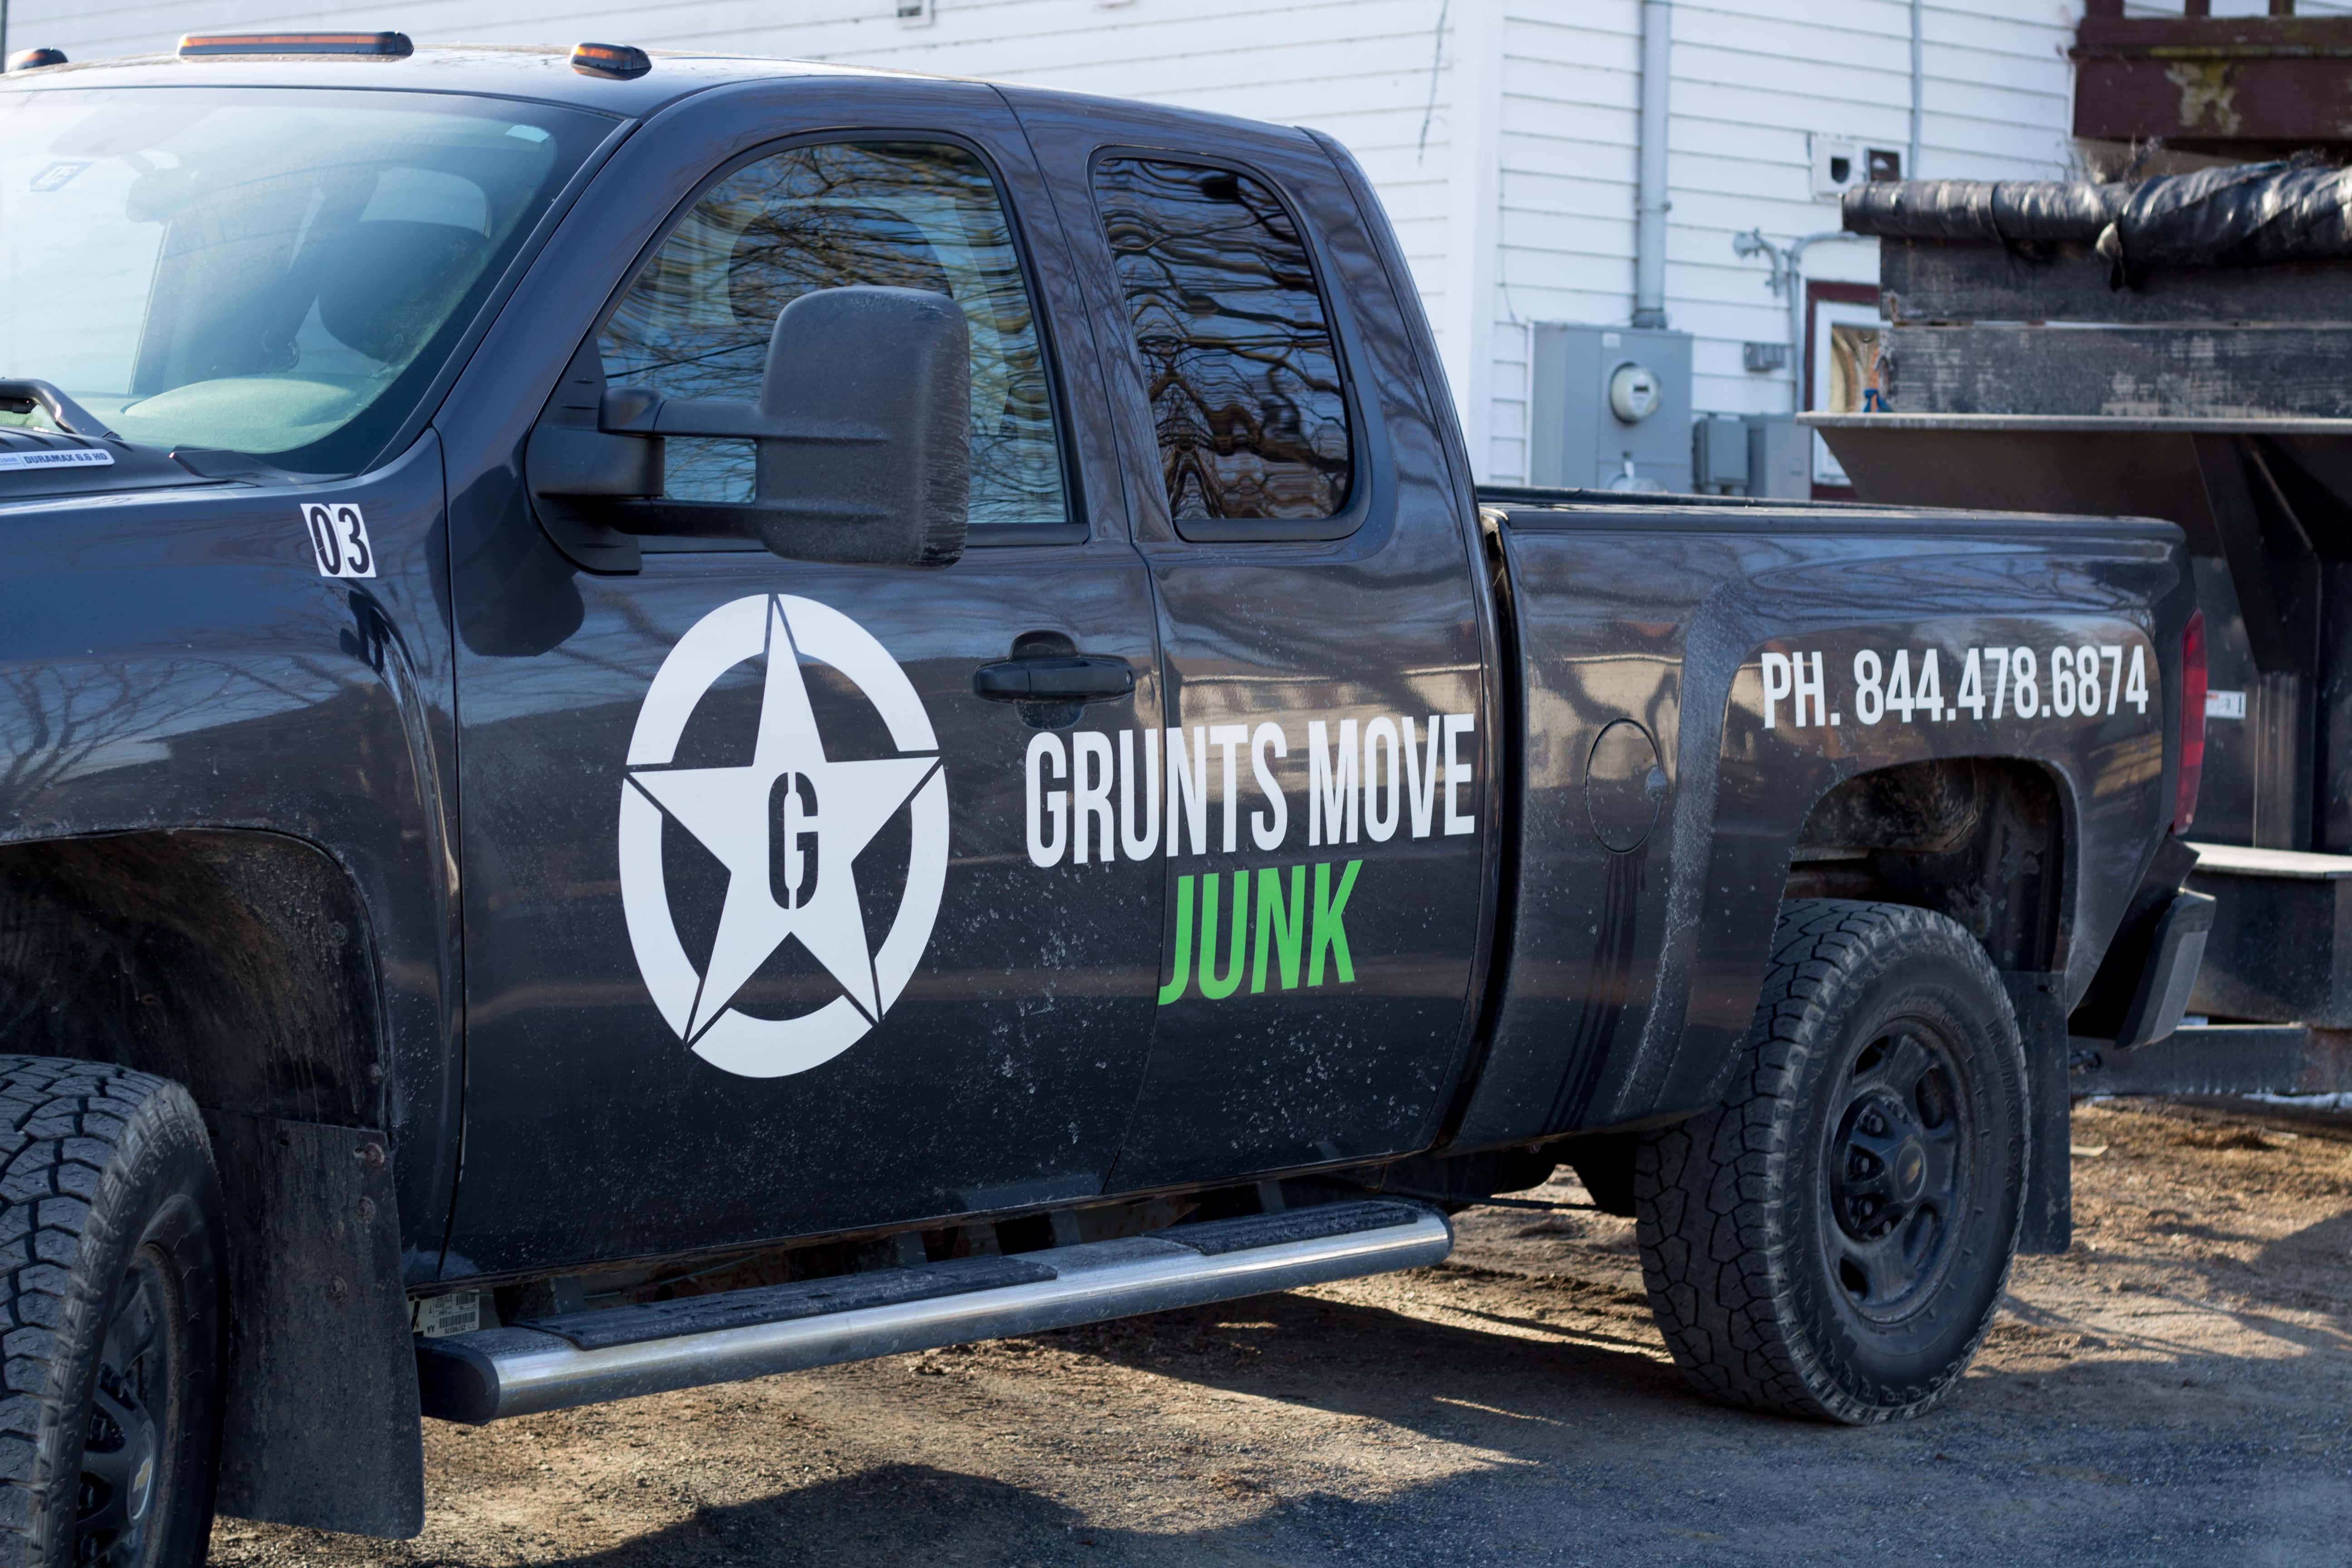 Grunts Move Junk - Bow, NH, US, cross country movers